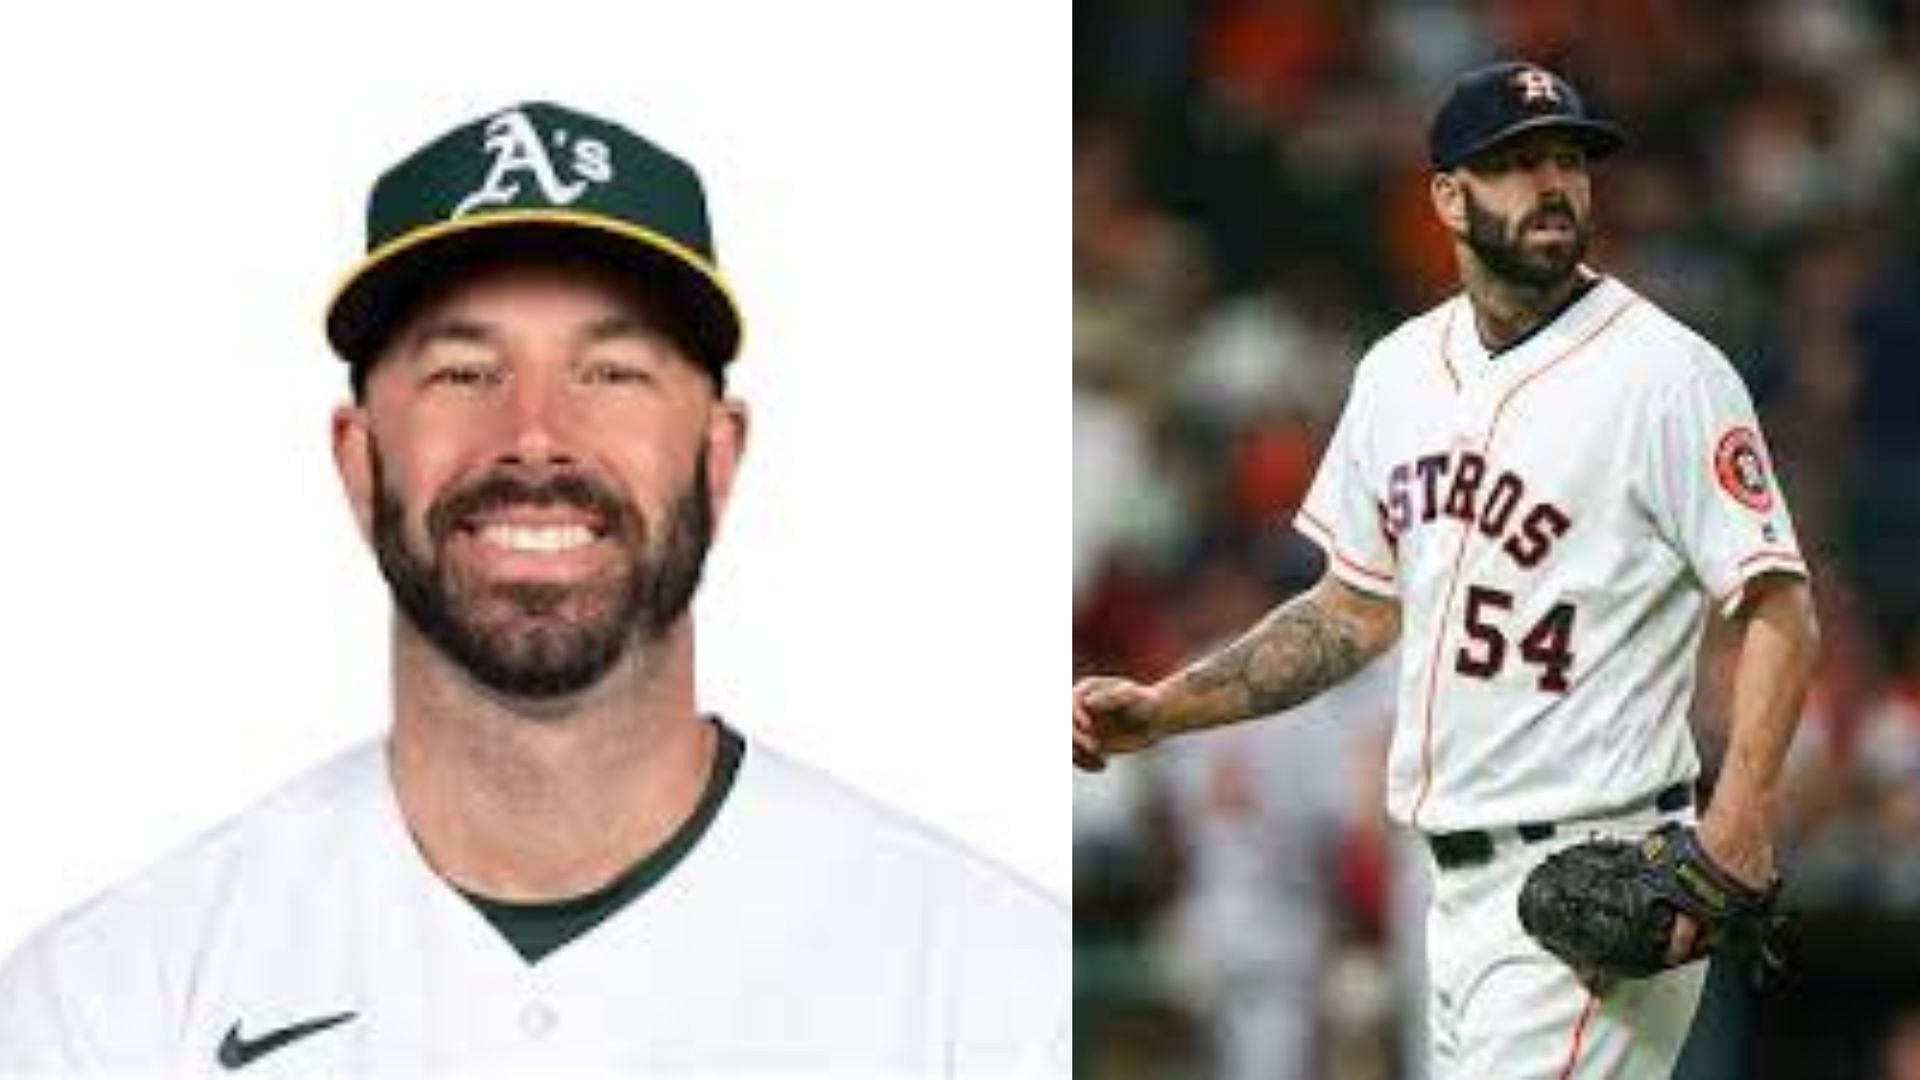 Oakland Athletics player, Mike Fiers